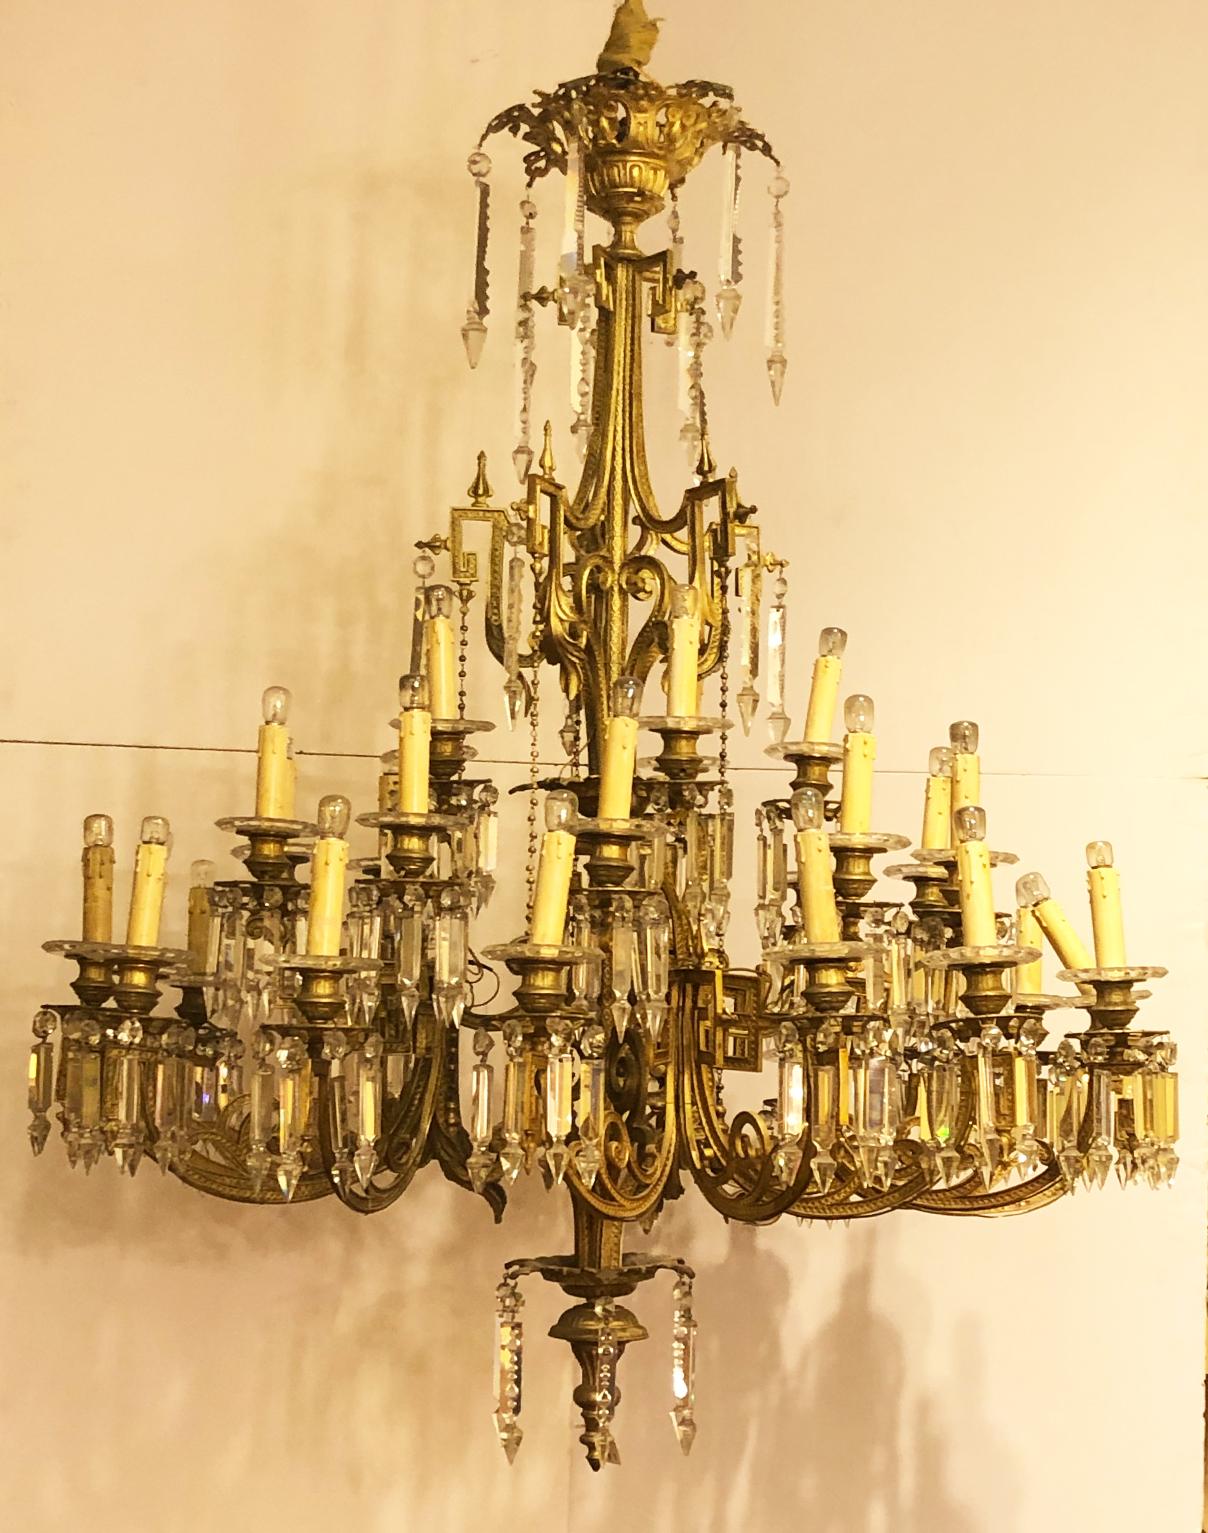 Large chandelier in gilded bronze with glass cups and pendants, Very bright, 32 lights, this chandelier is typical of the Italian manufacture of the mid-19th century. This chandelier was used for the filming of Walt Disney's latest Cinderella film,